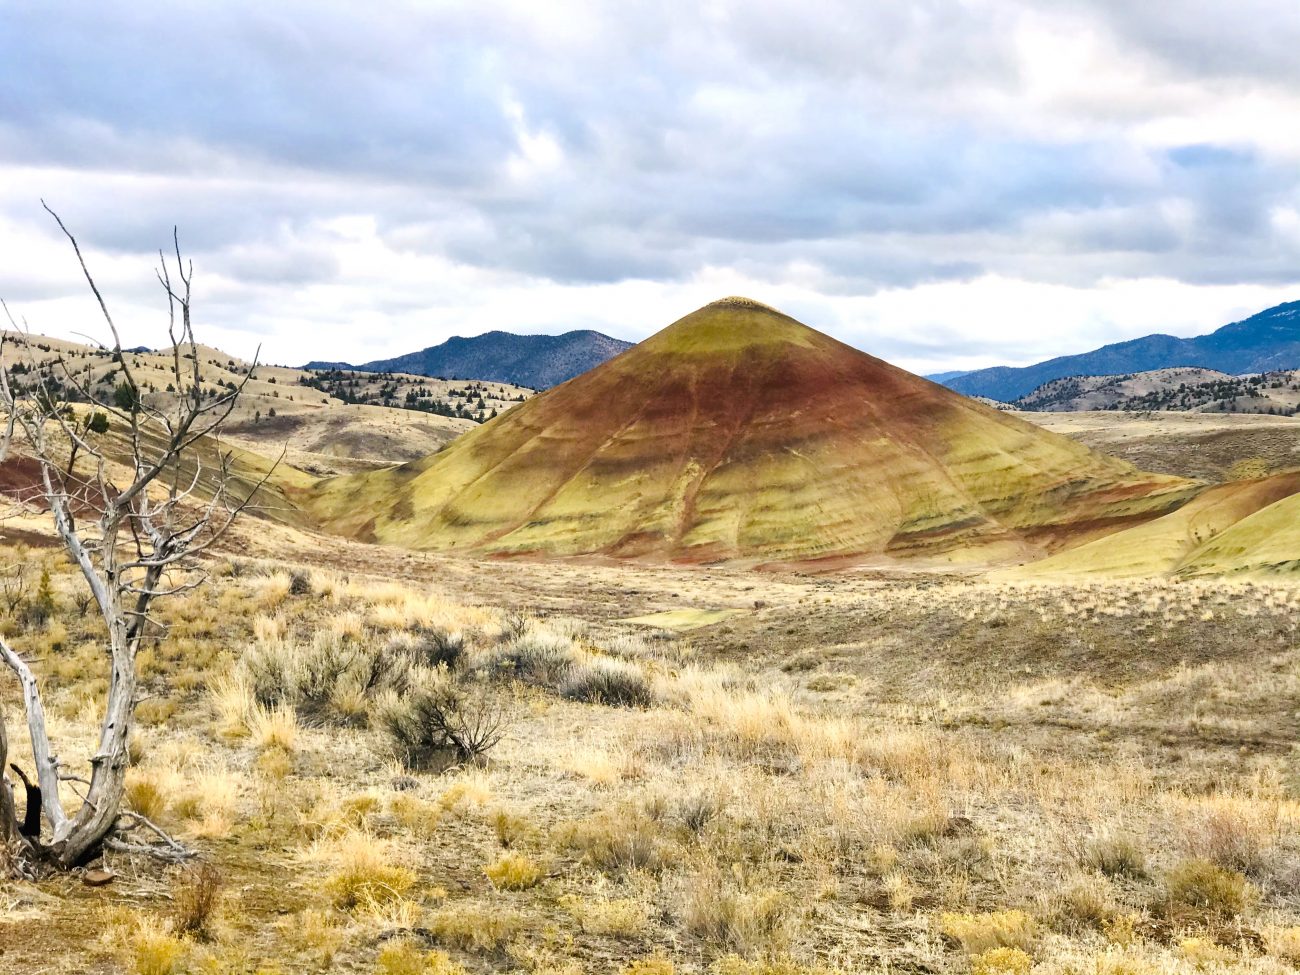 The Painted Hills Overlook Trail: A gateway to mesmerizing views.